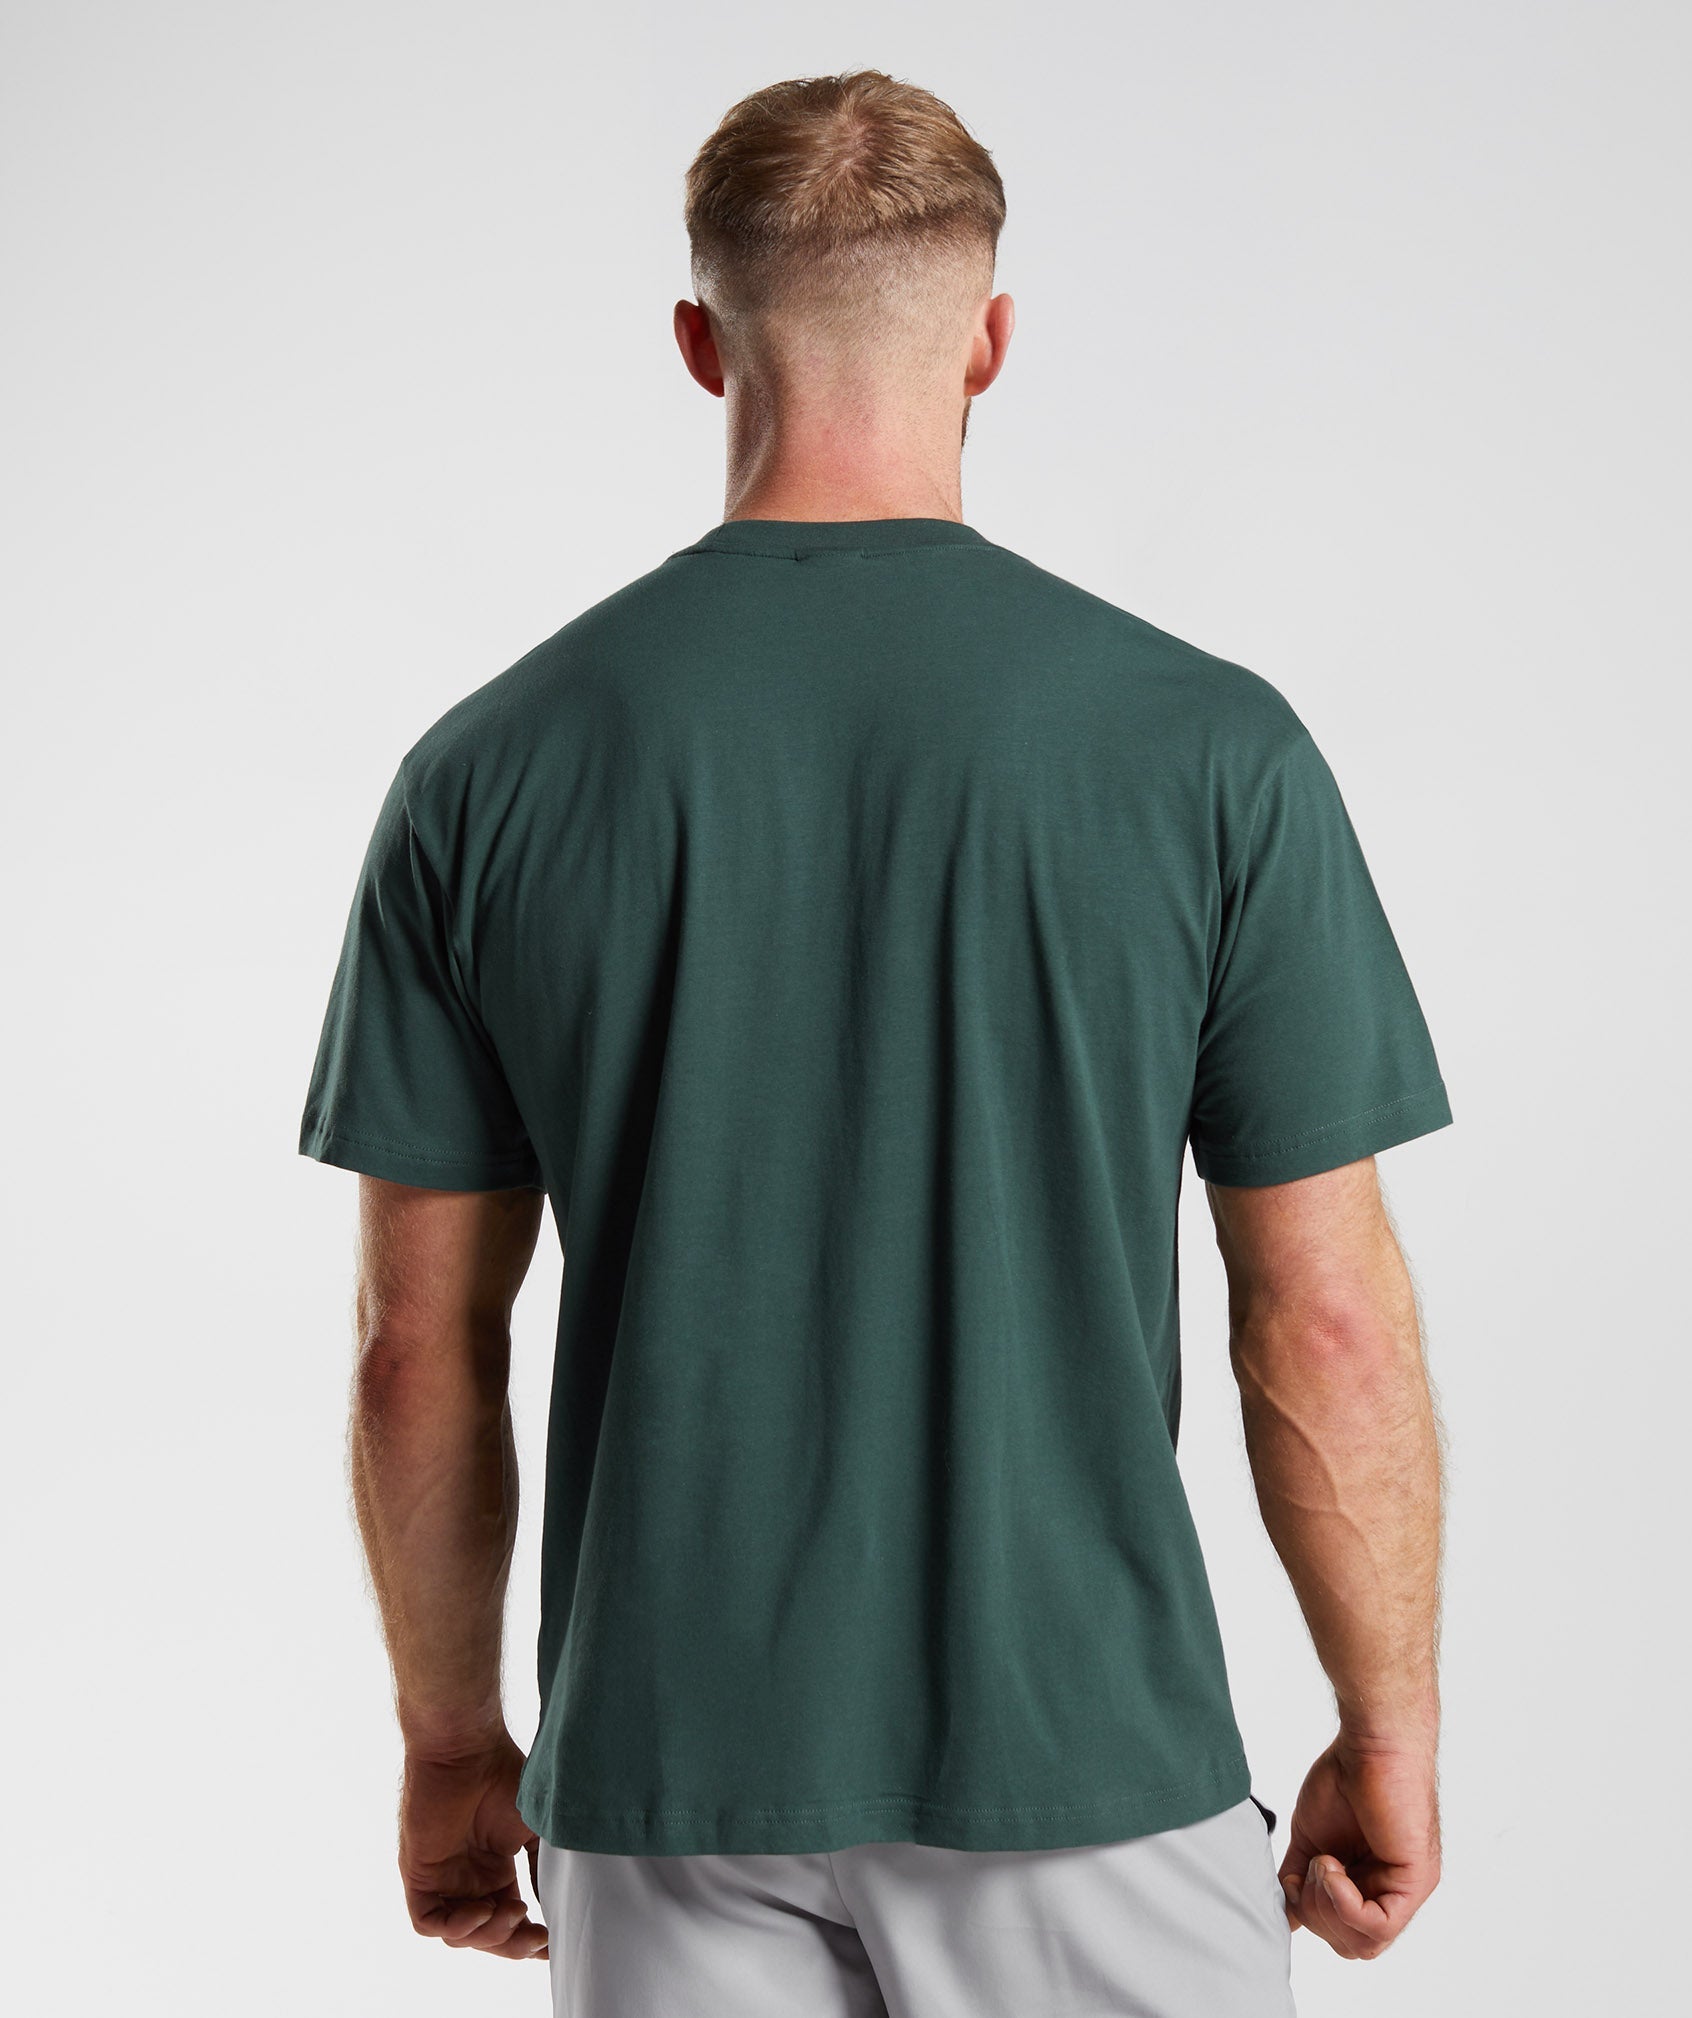 Apollo Oversized T-Shirt in Obsidian Green - view 2